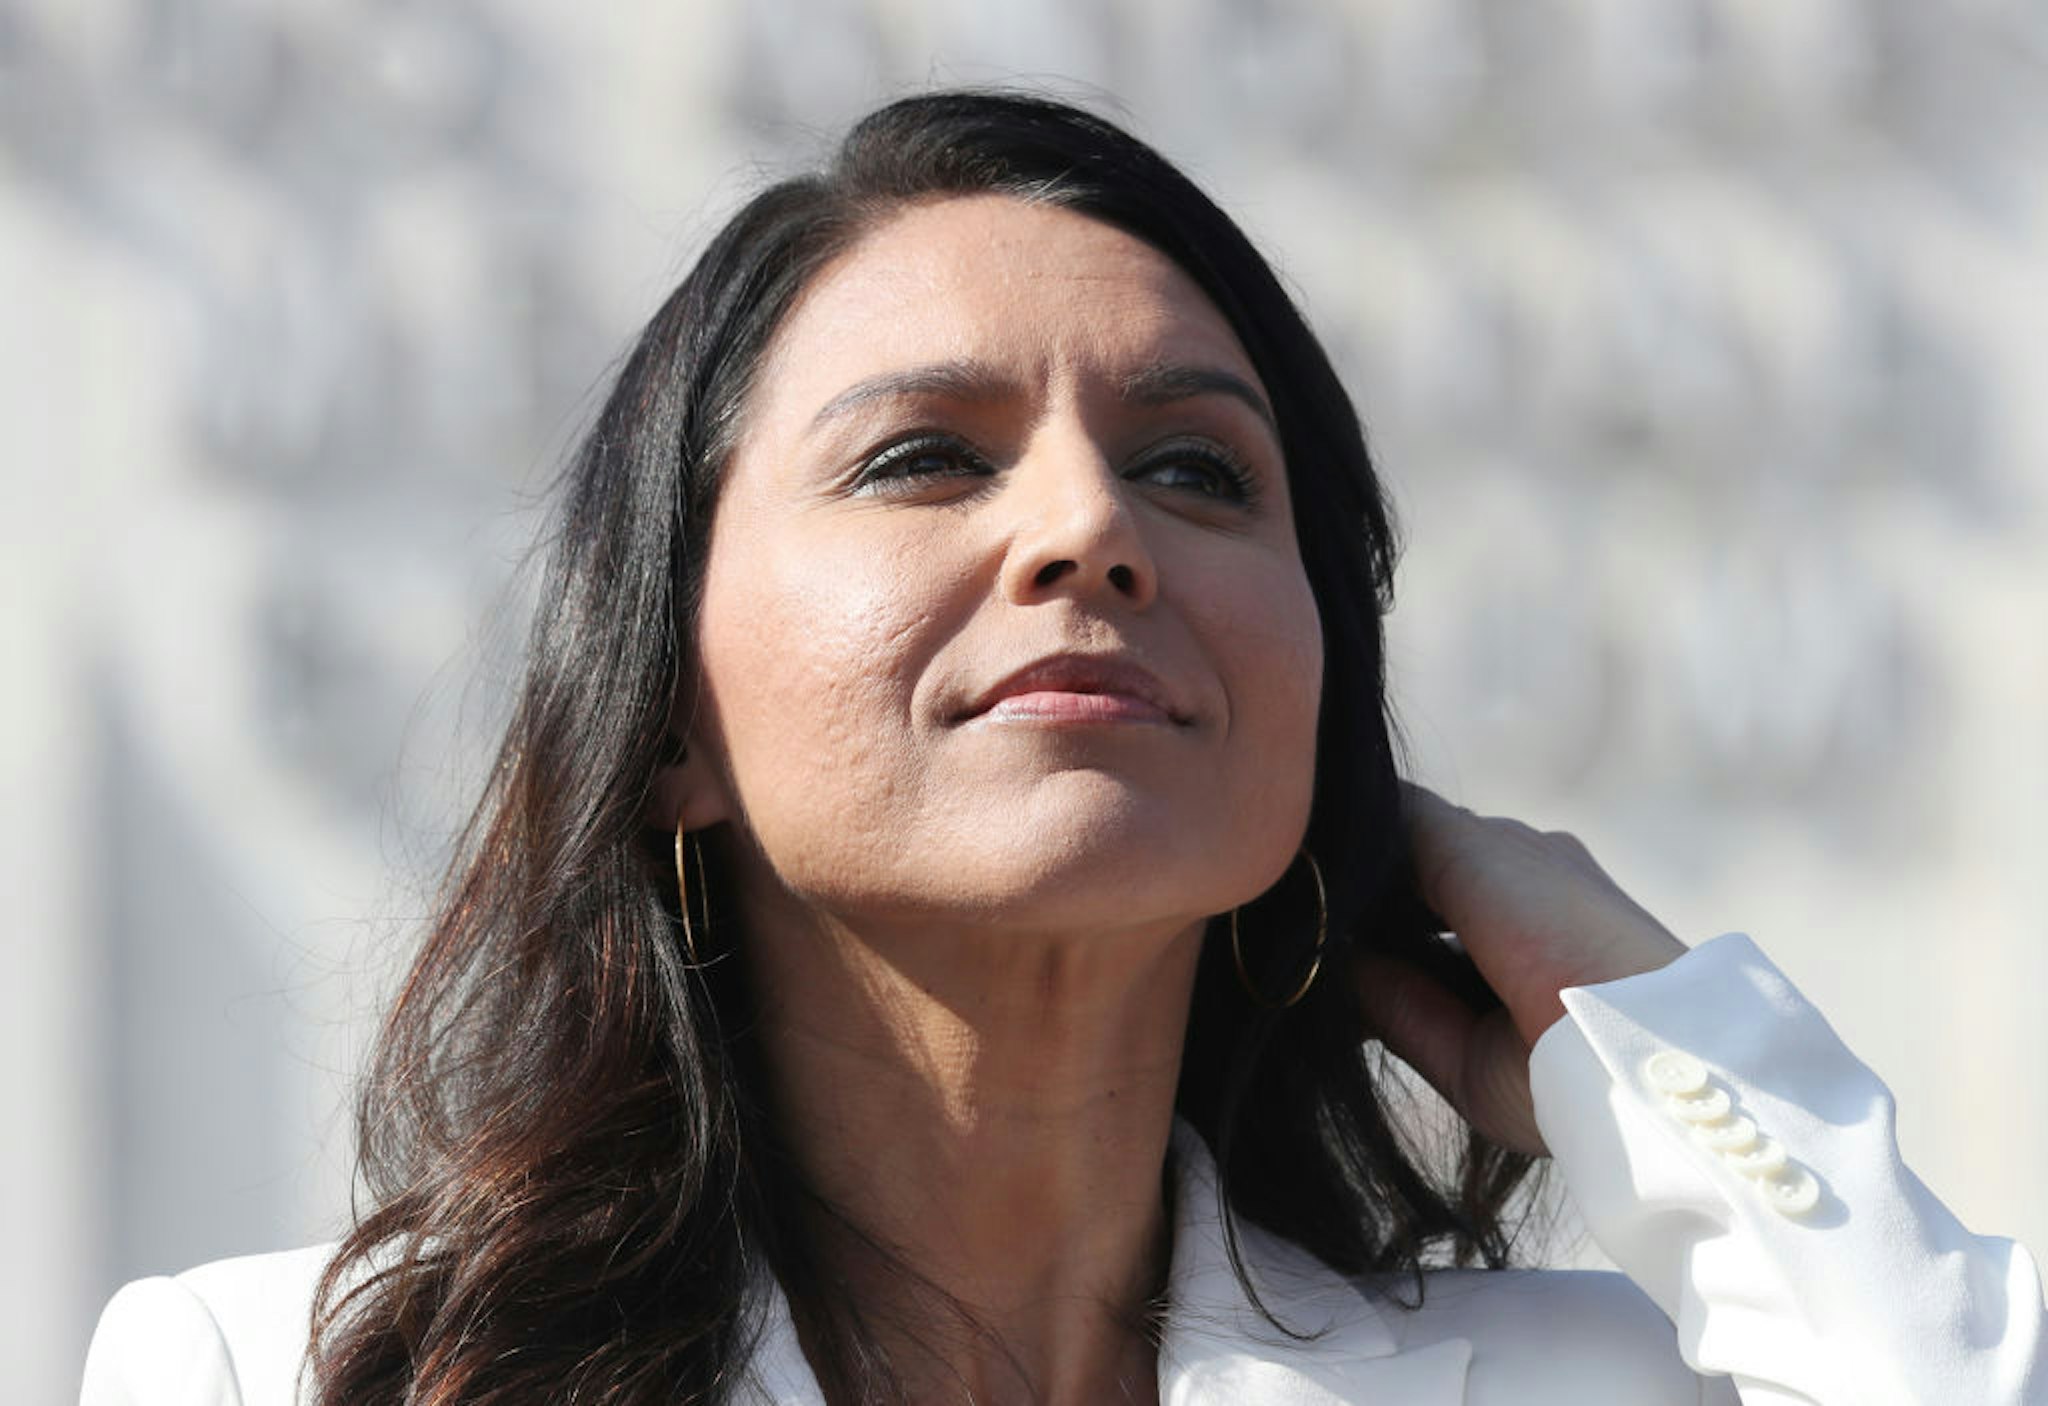 Tulsi Gabbard attends the inaugural Veterans Day L.A. event held outside of the Los Angeles Memorial Coliseum